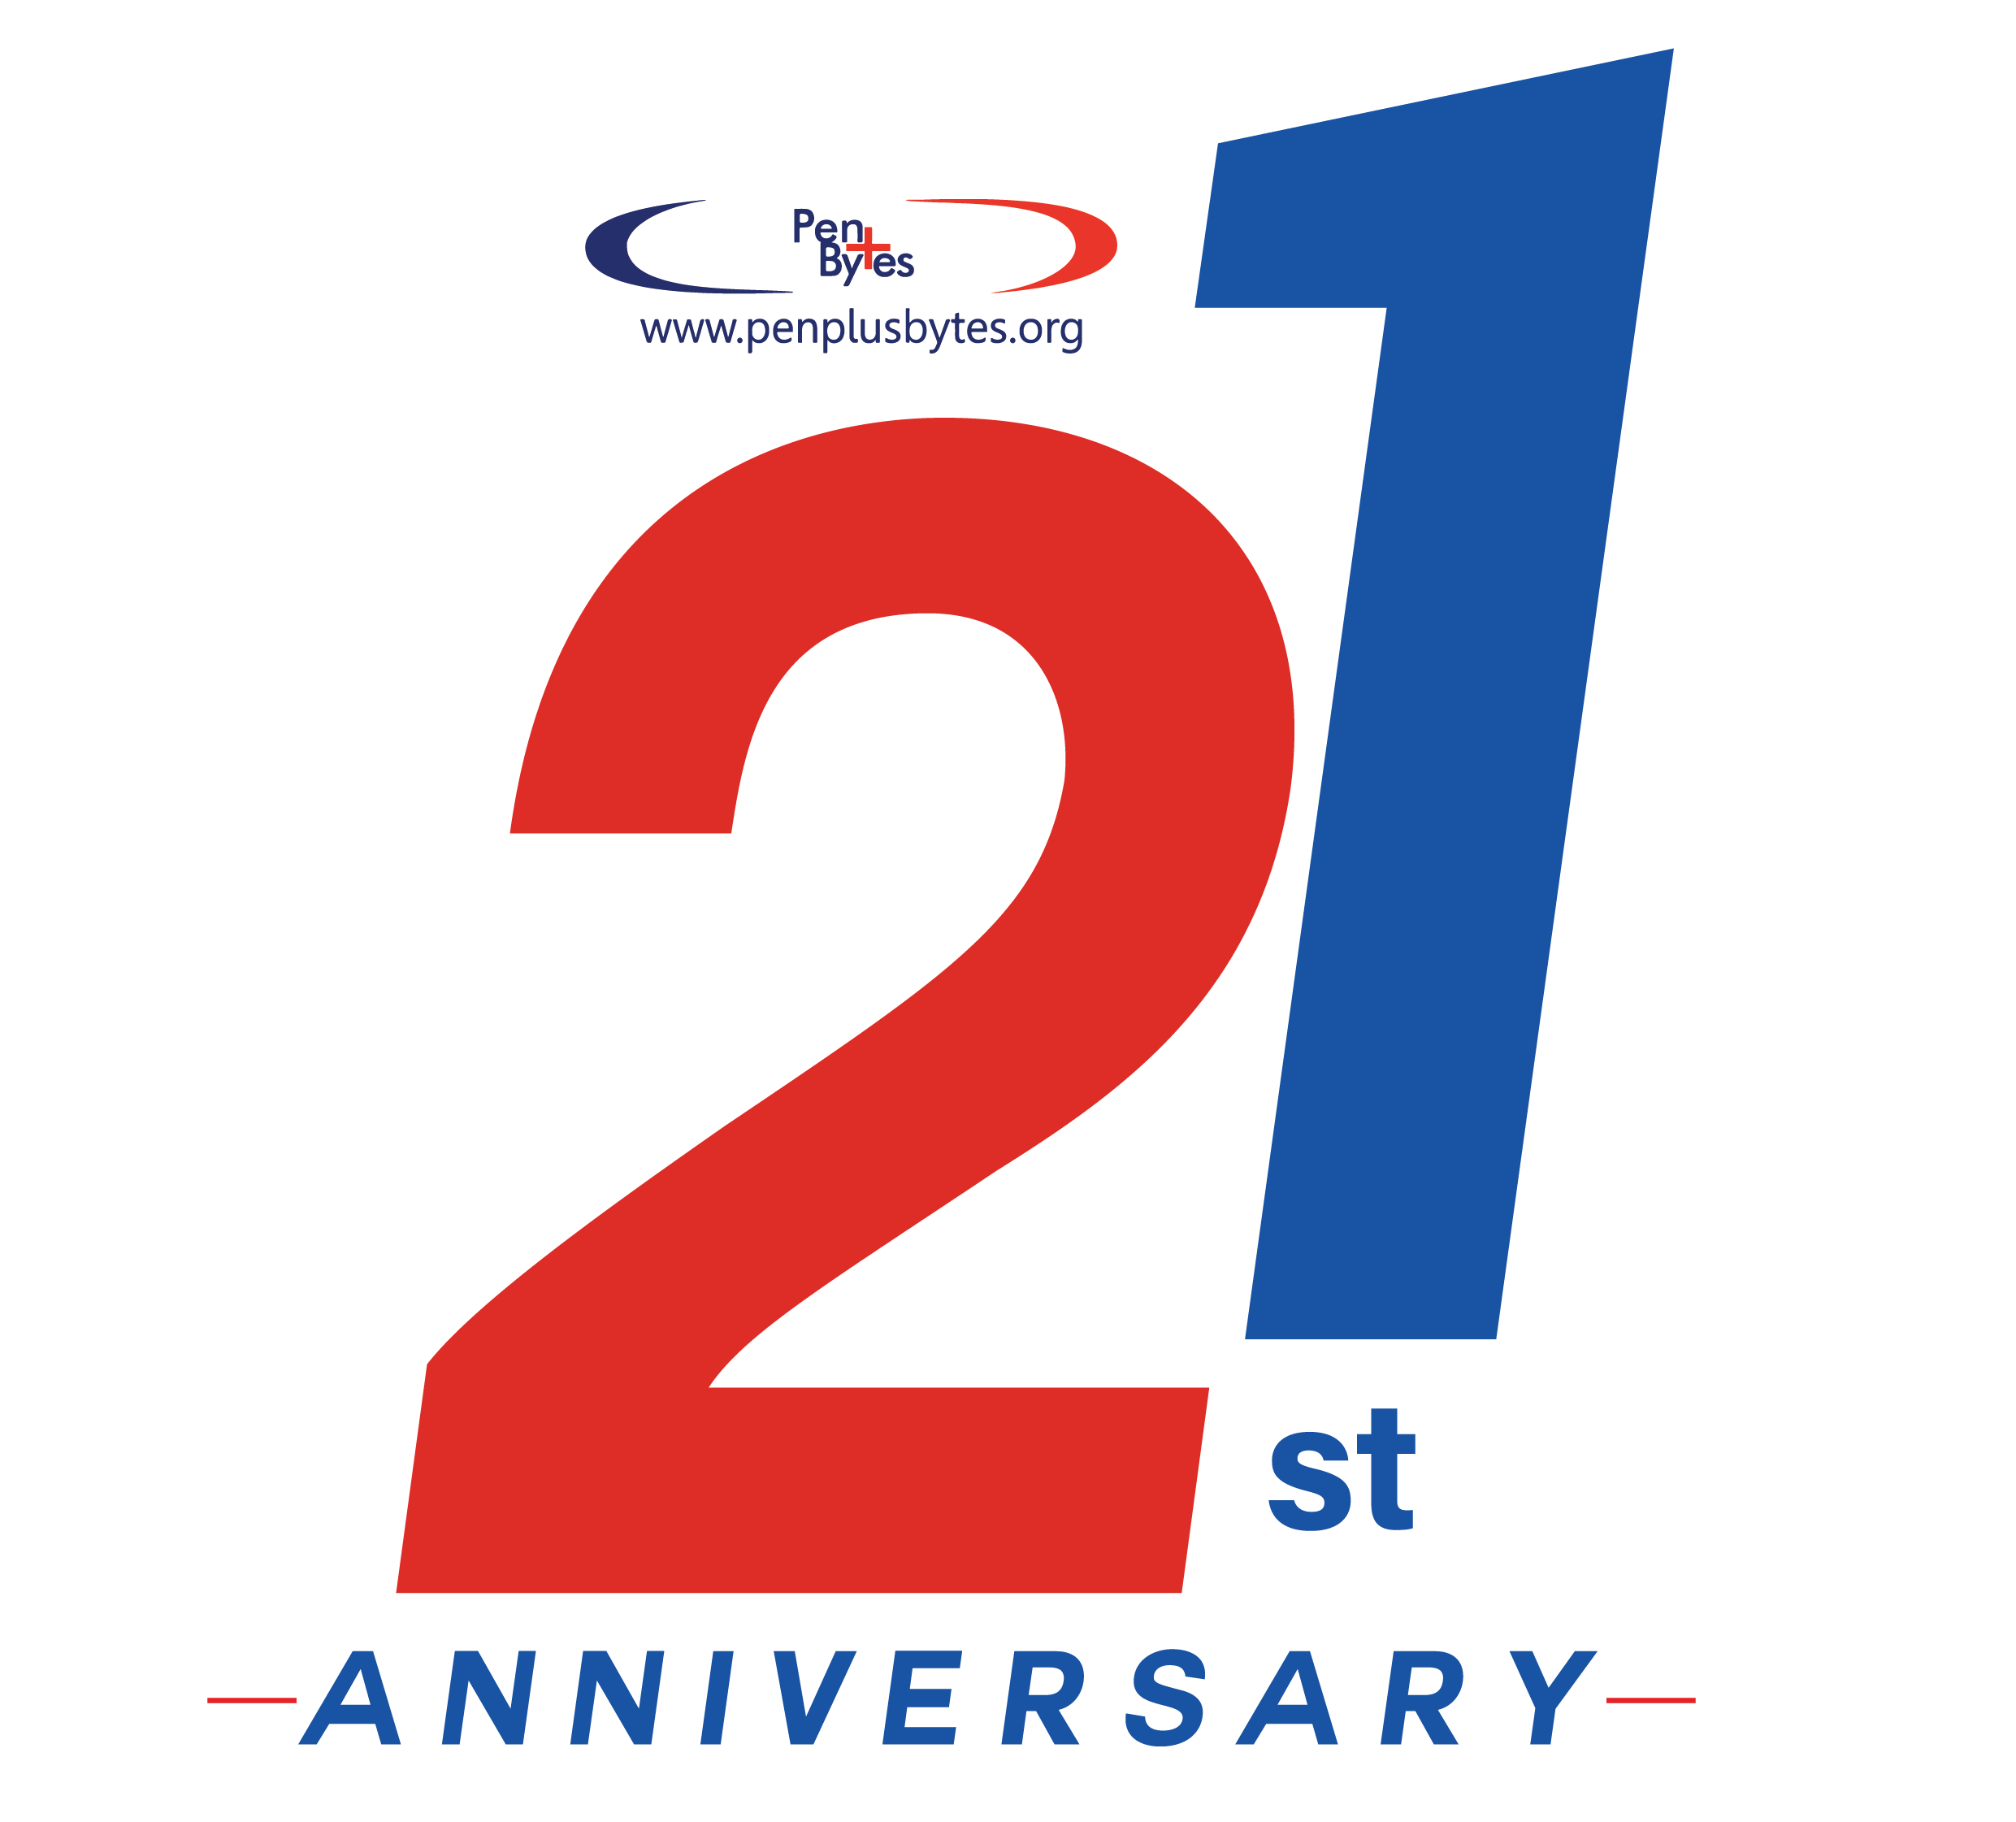 21 years of Catalysing Innovations across Networks and Communities